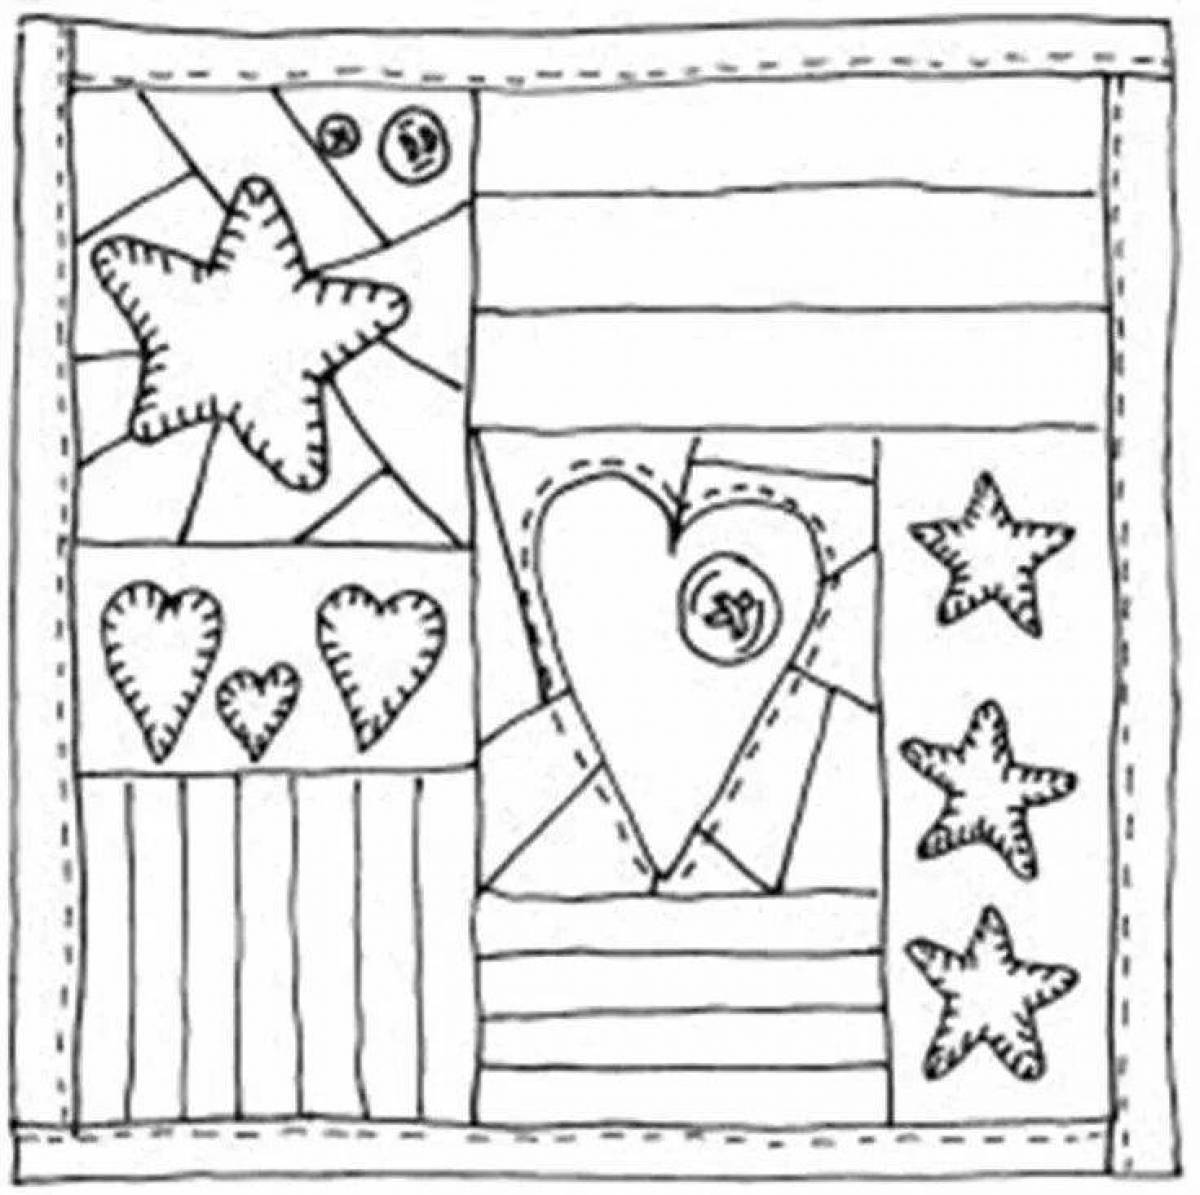 Comfortable blanket coloring page